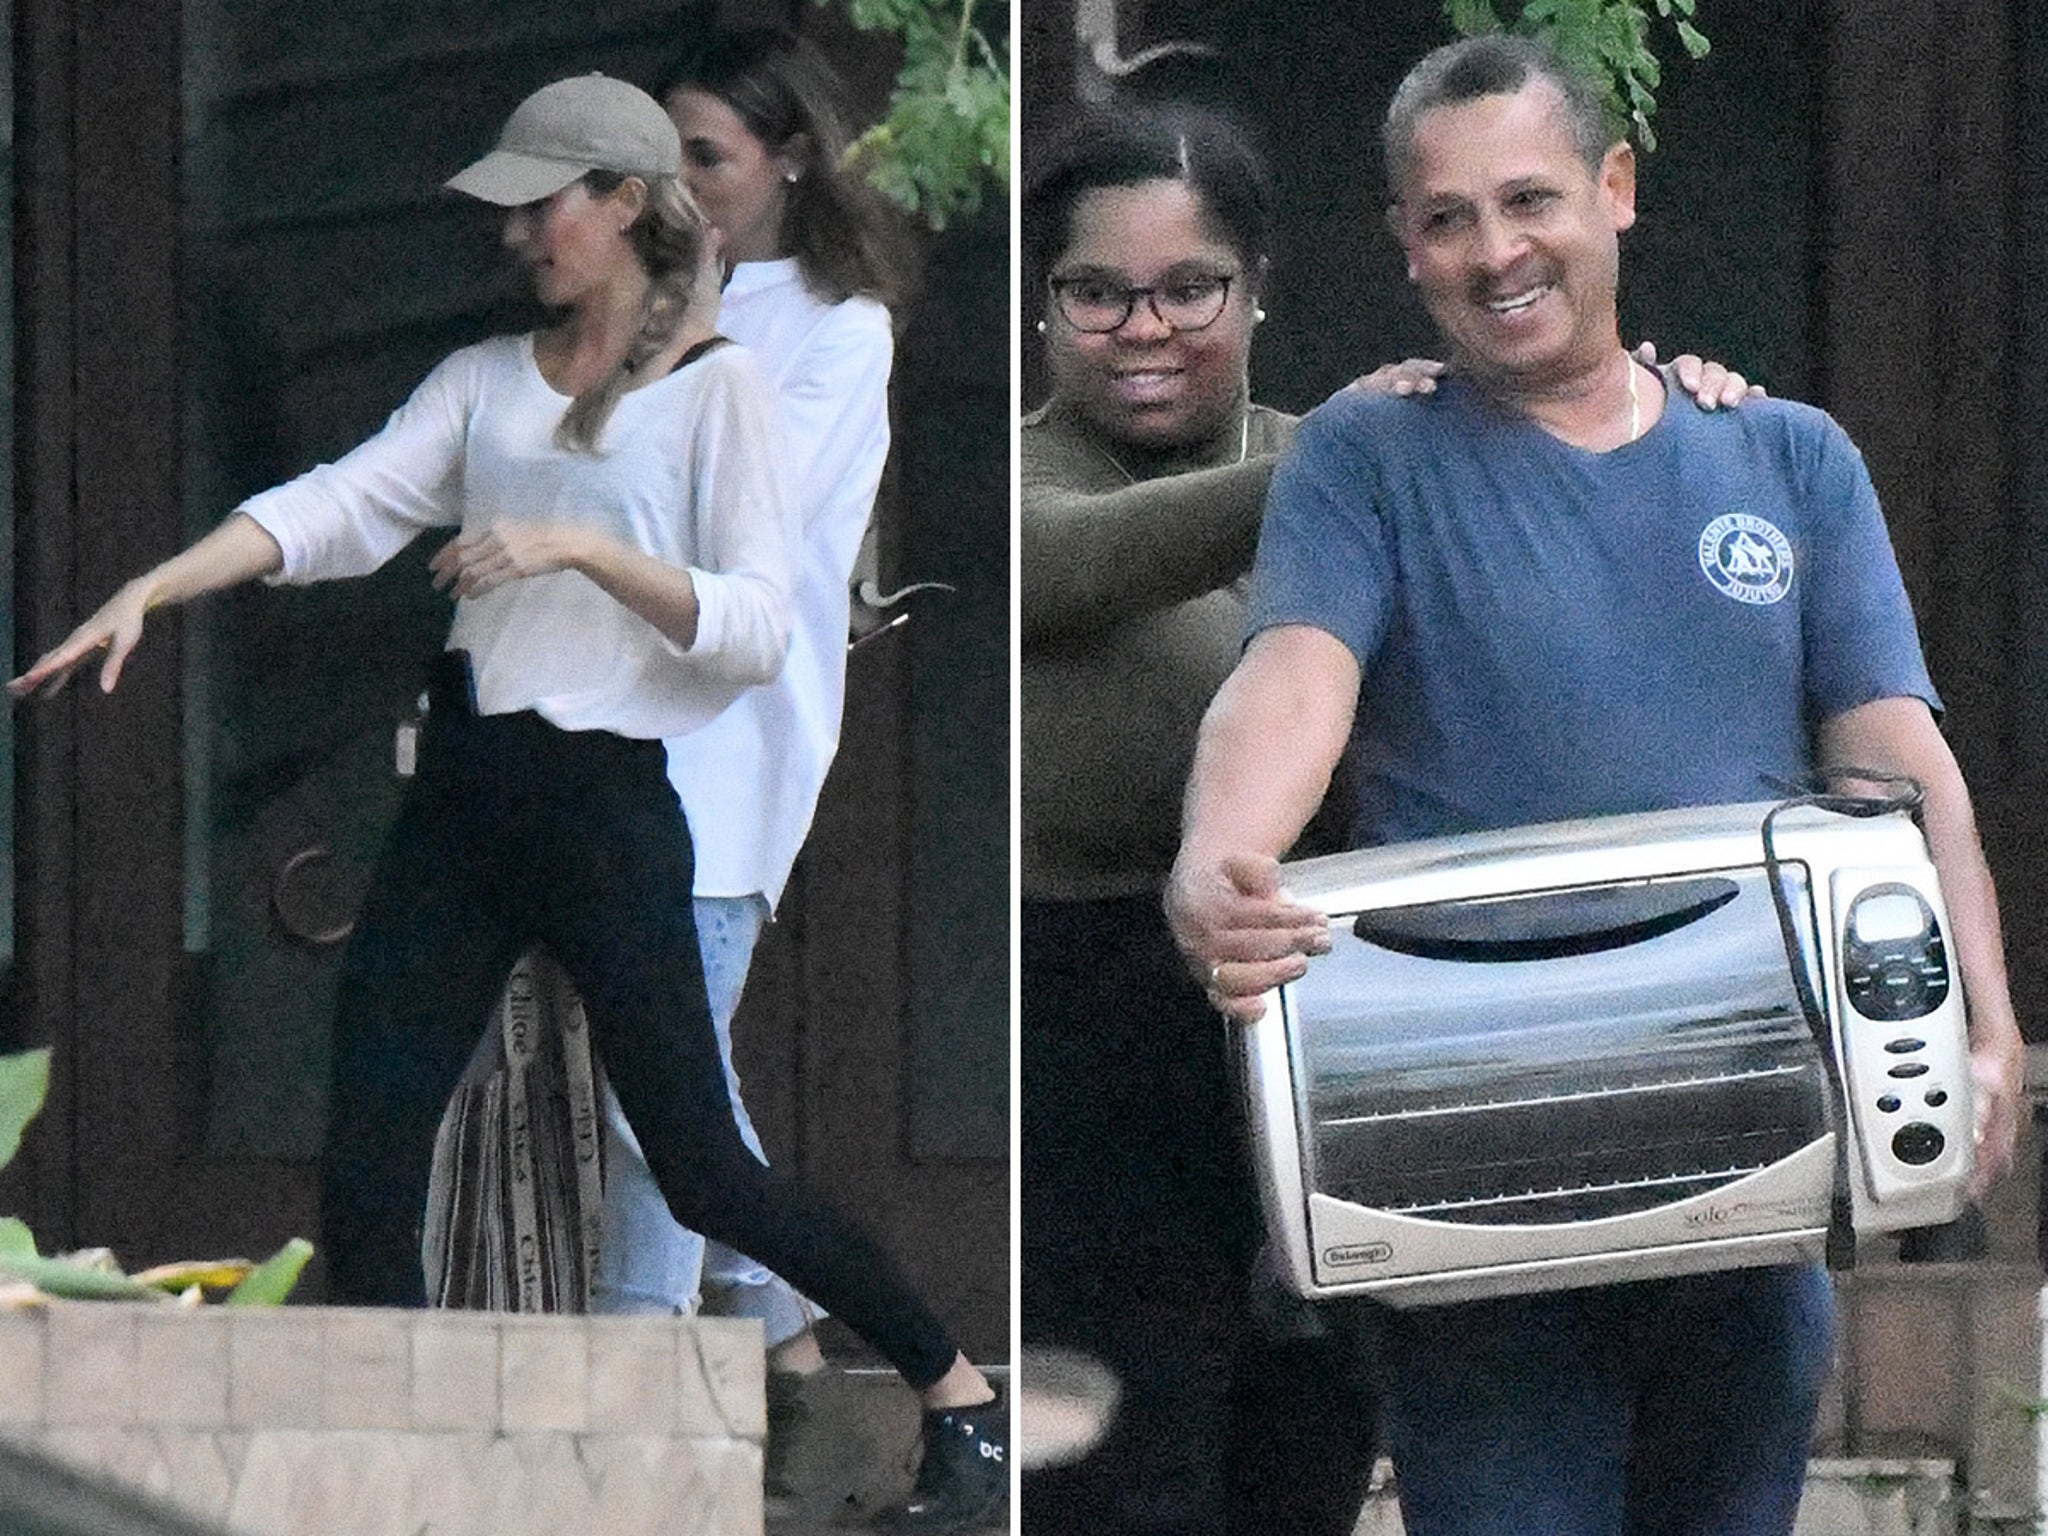 Gisele Bündchen Moving Into New FL Home With Help From Joaquim Valente Associate - TMZ (Picture 1)